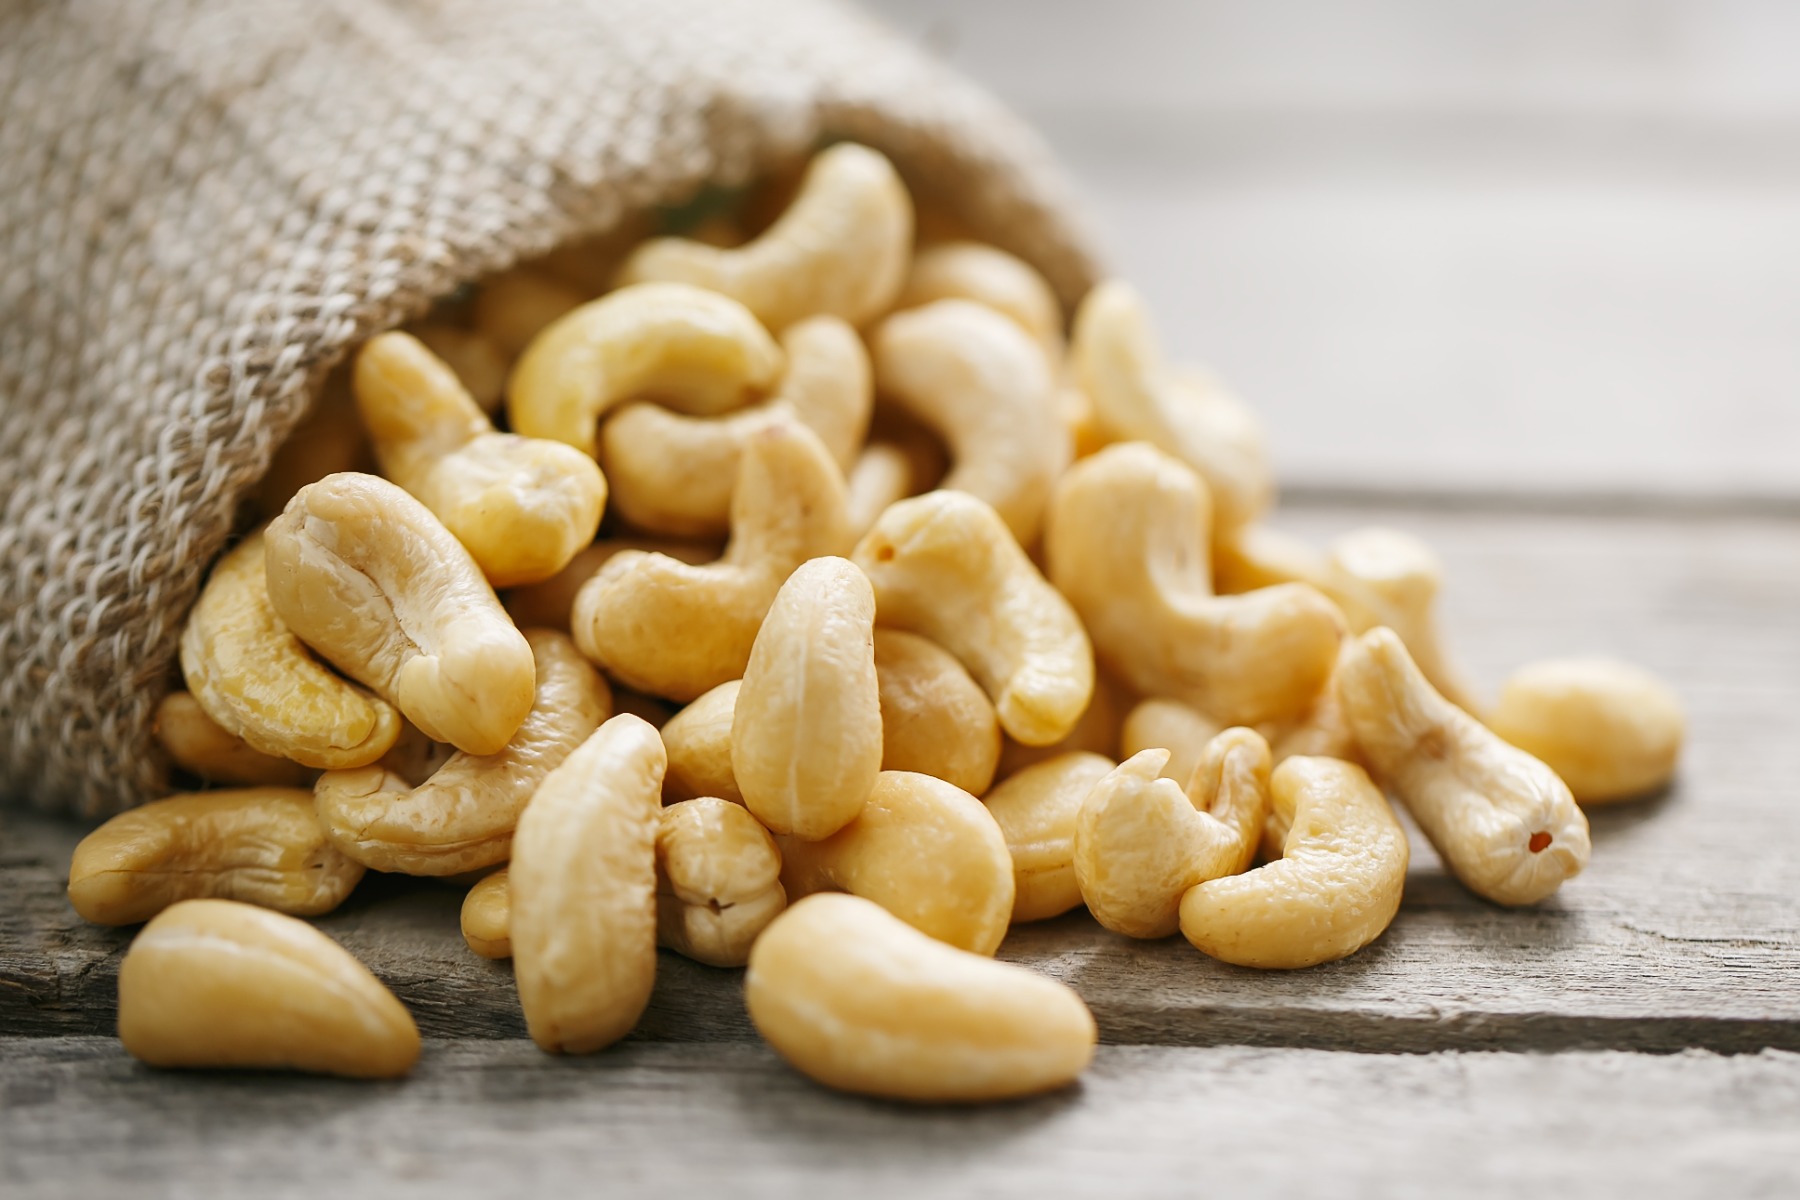 Peelled cashews pouring from a brown bag